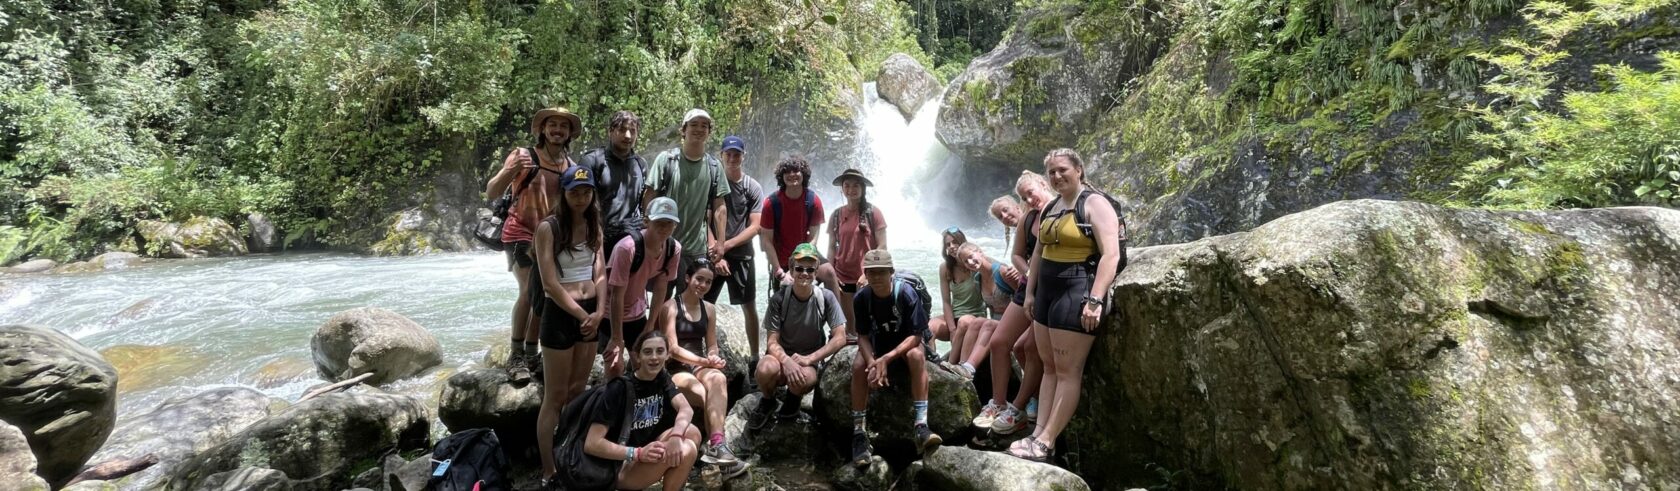 a group of student pose in front of a waterfall